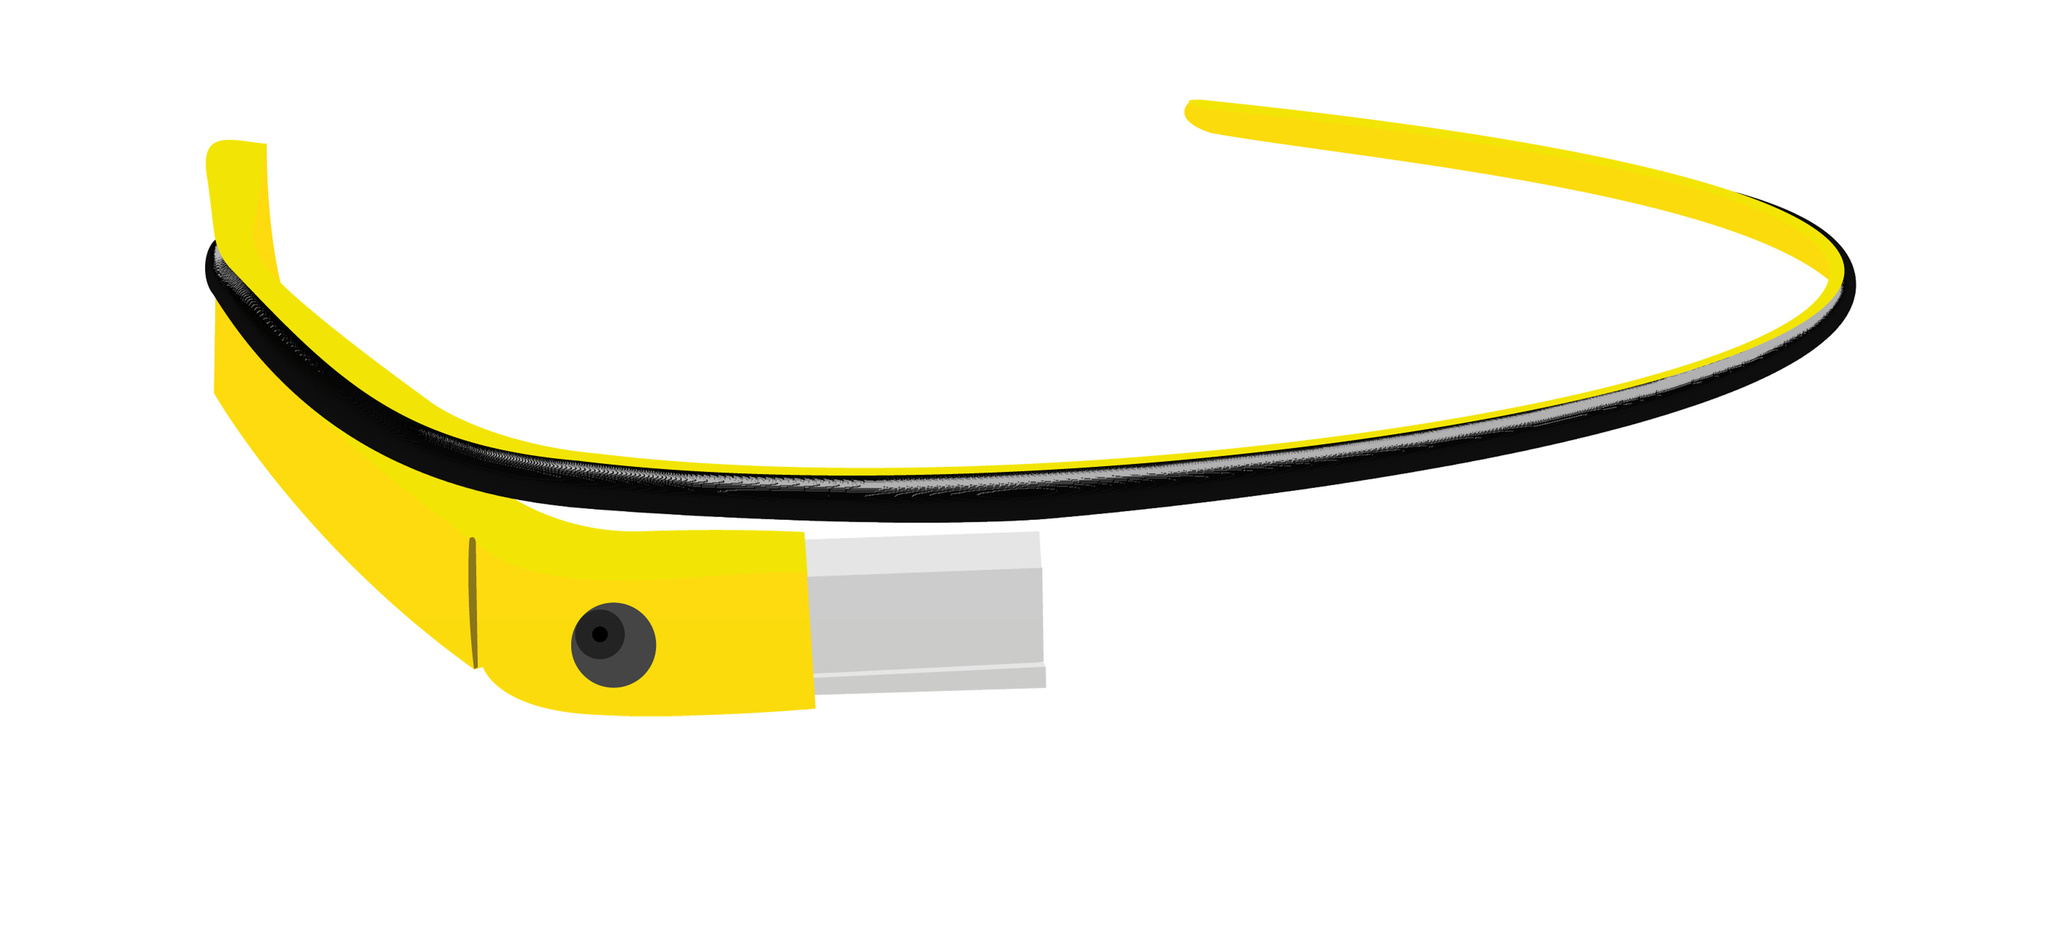 The Debacle of Google Glass